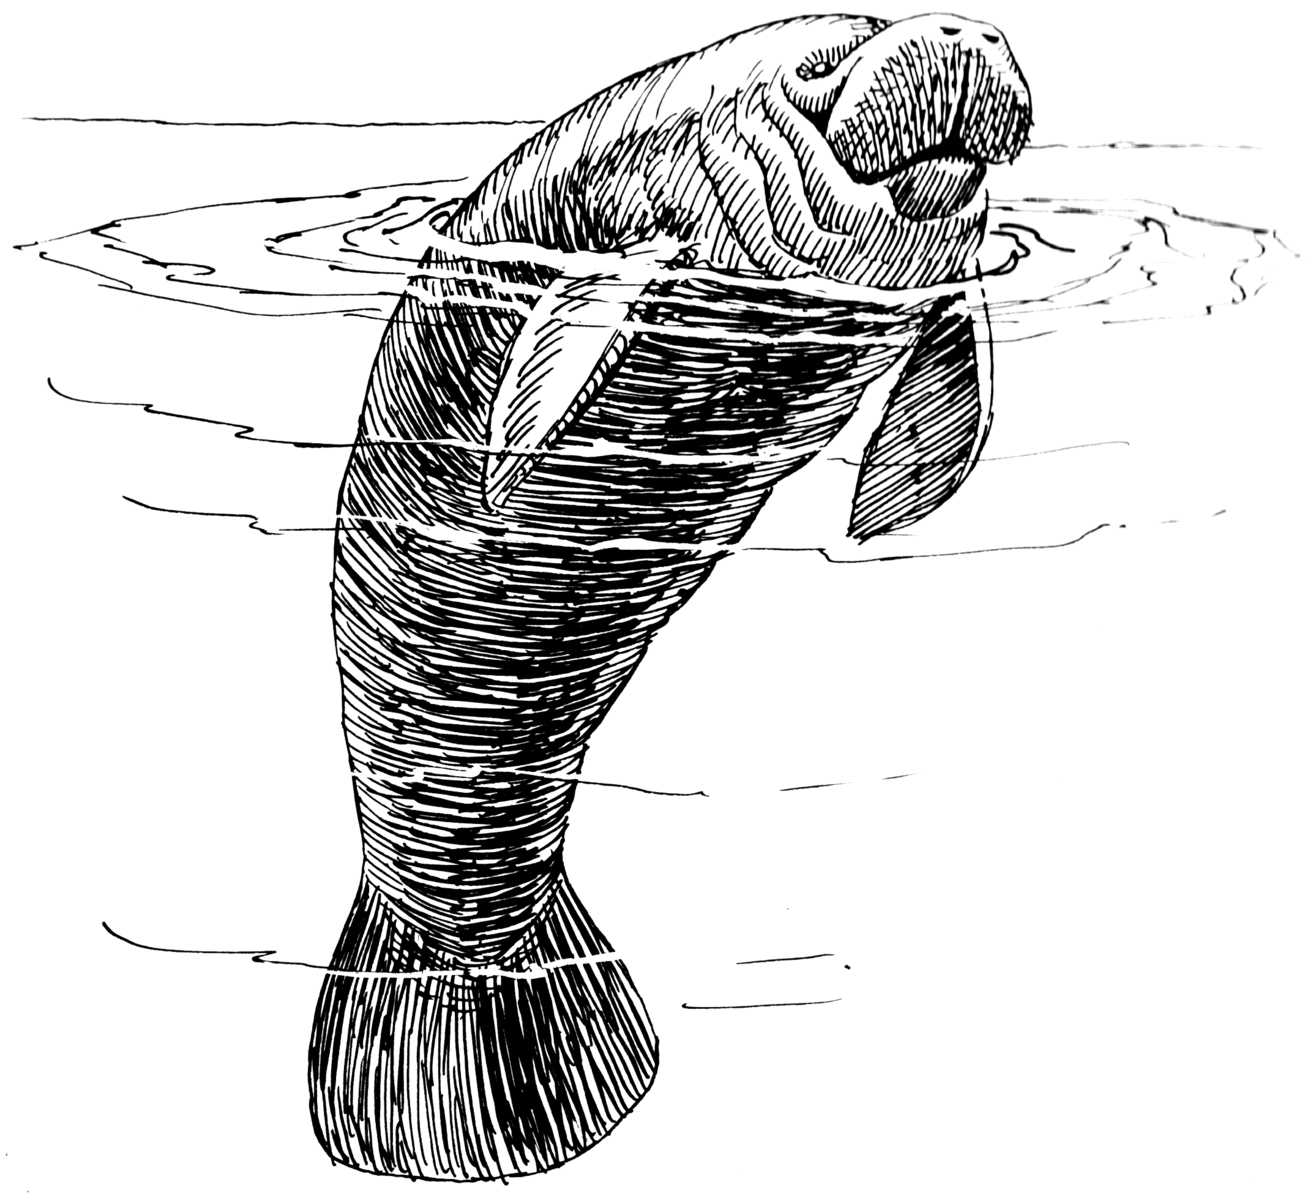 A drawing of a manatee